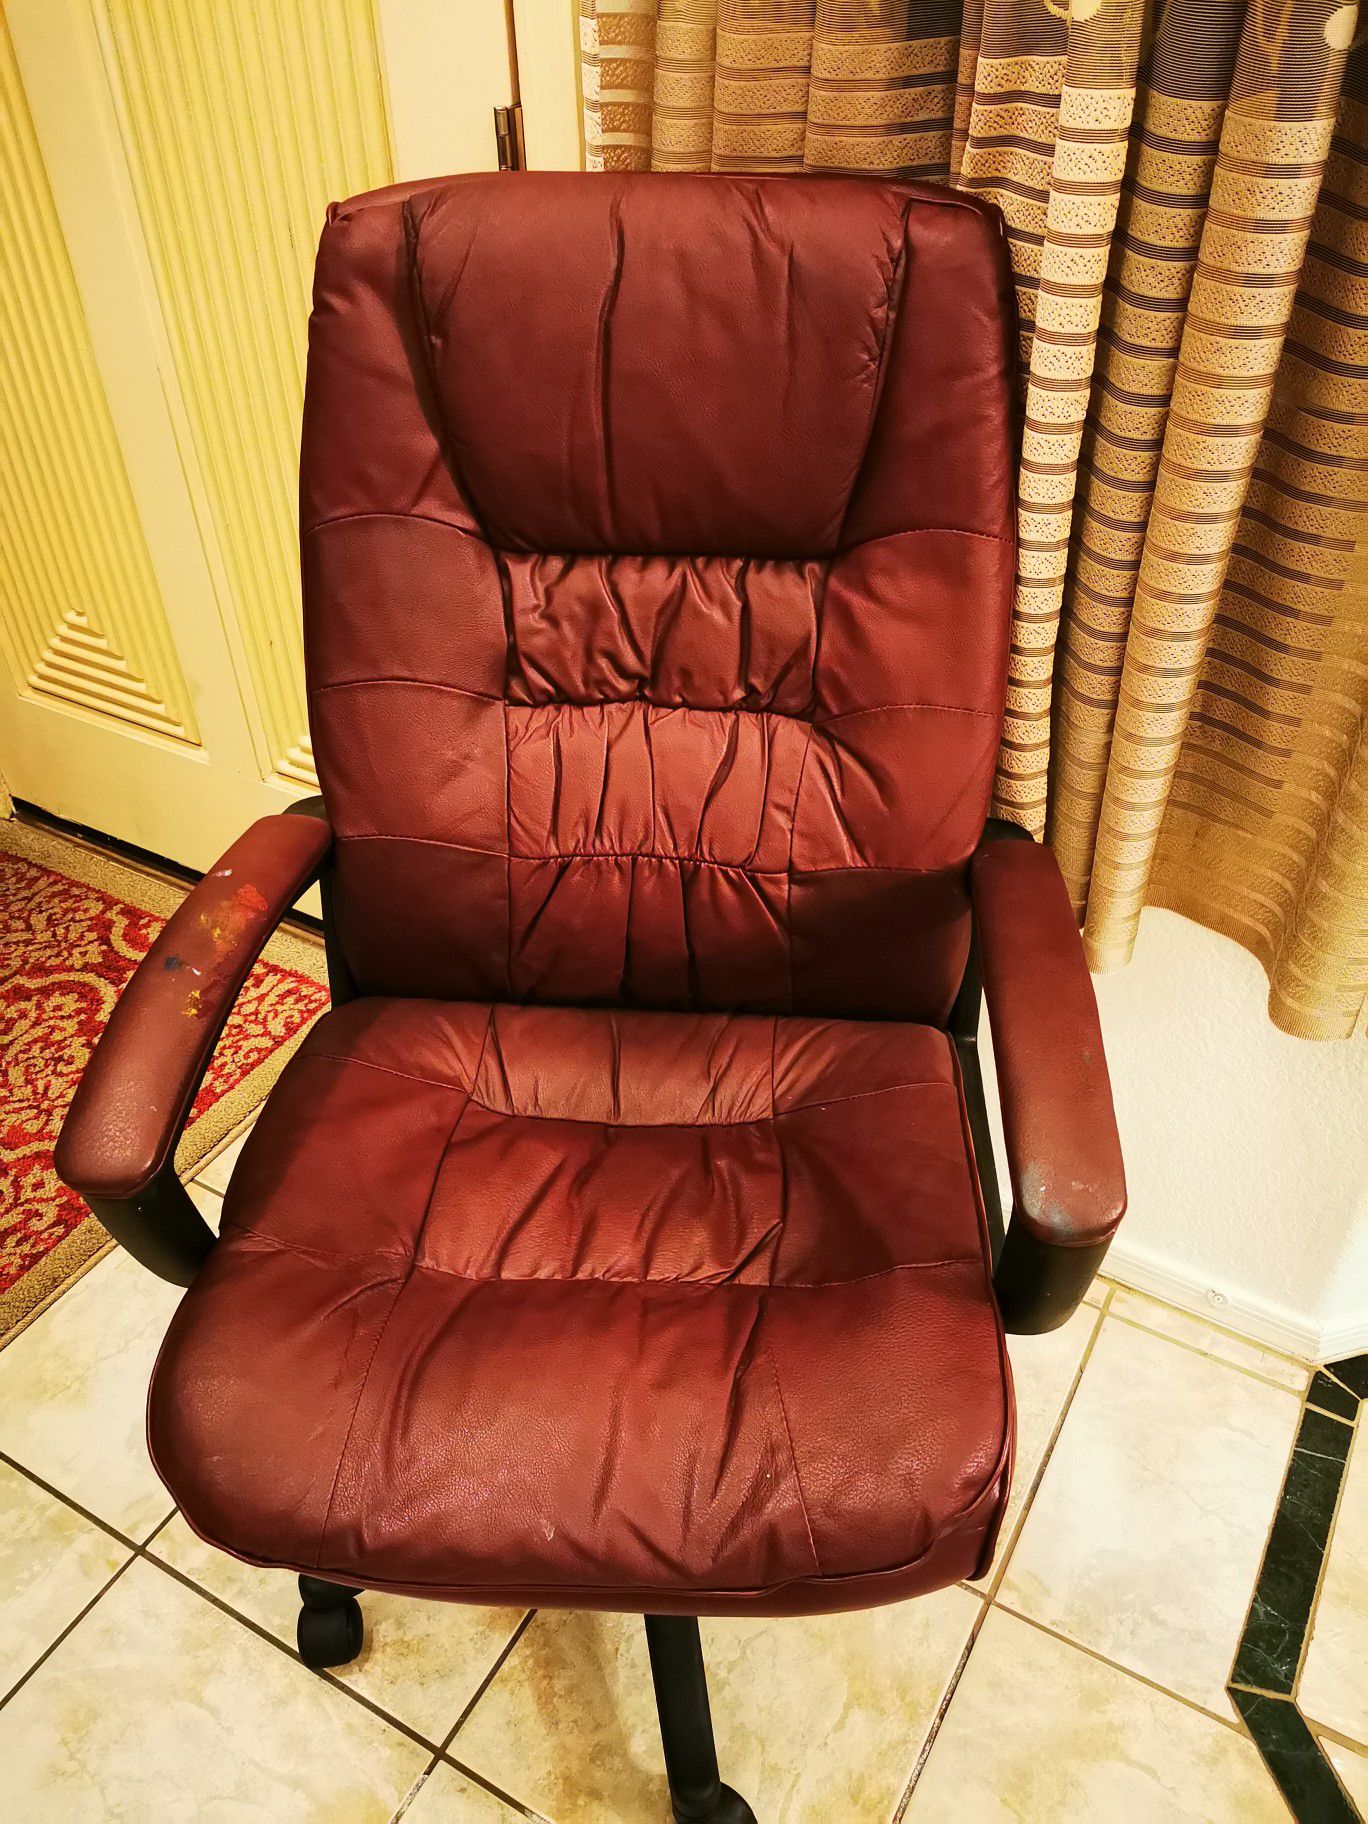 Red office chair $20.